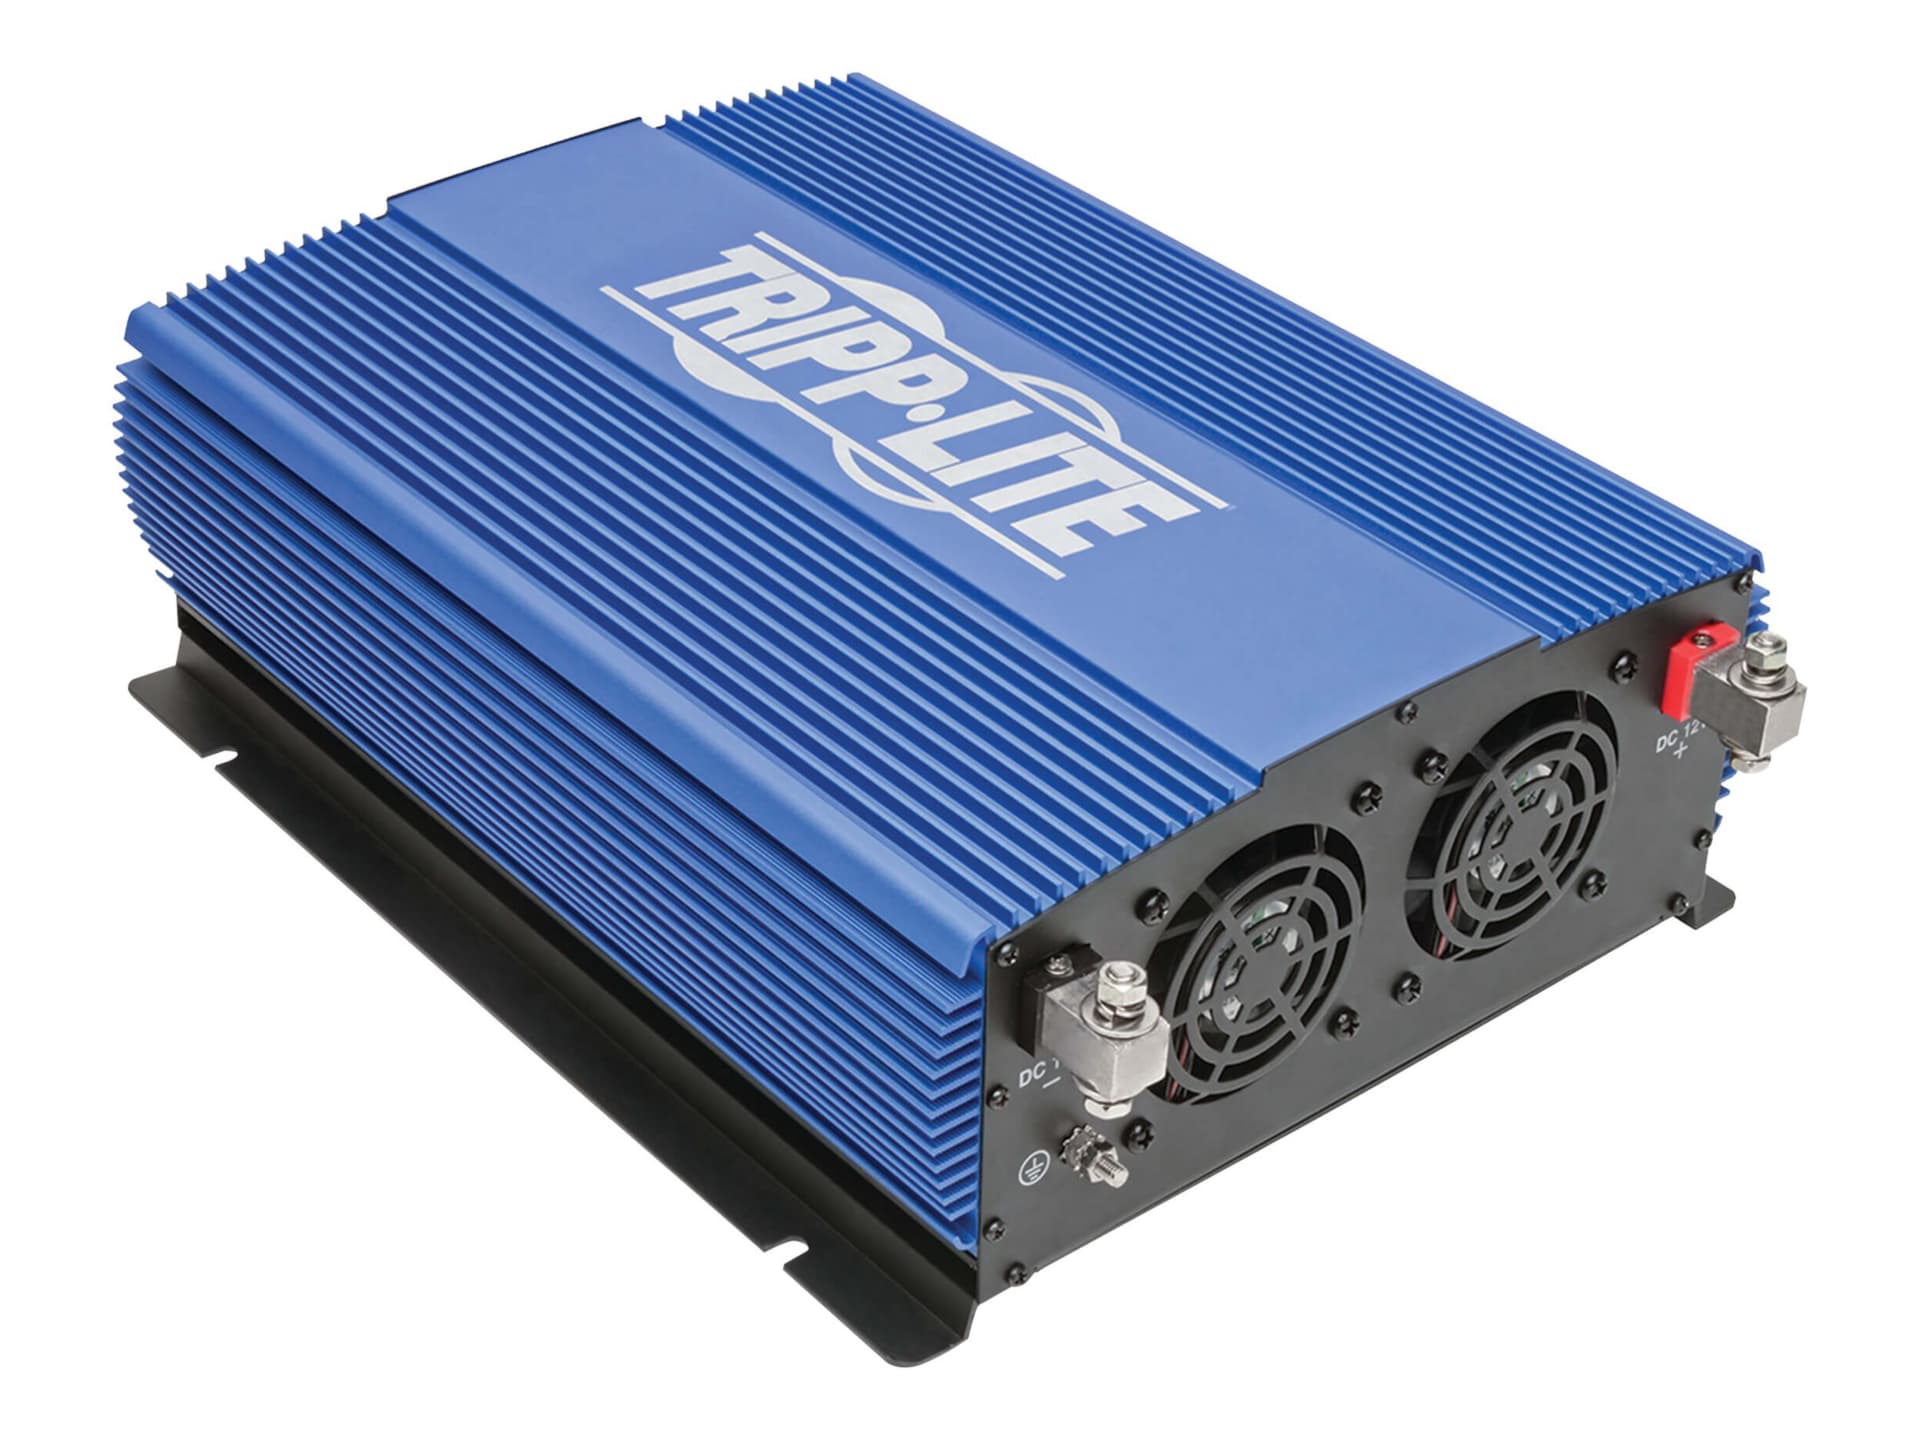 Tripp Lite 2000W Compact Power Inverter Mobile Portable w/ 4 Outlets &amp; 2 USB Ports - DC to AC power inverter - 2000